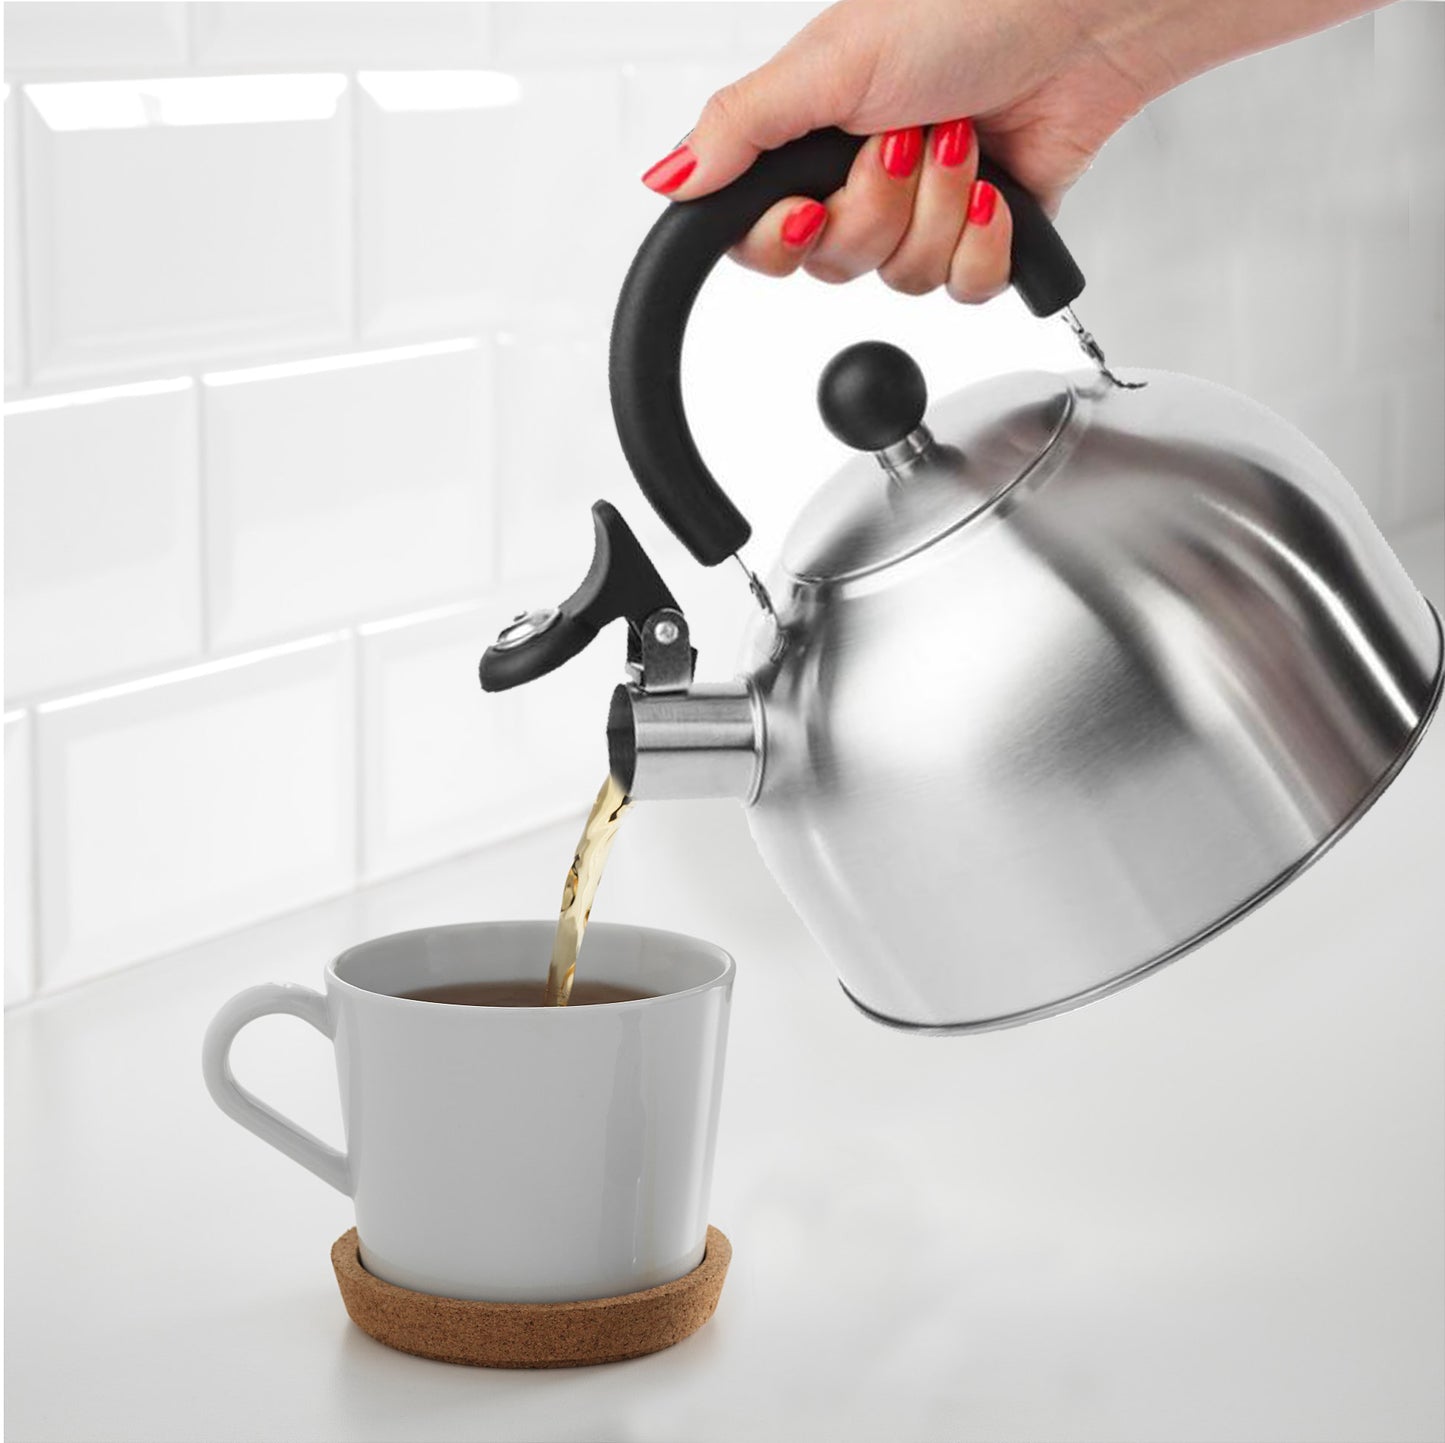 Whistling Stovetop Tea Kettle, Durable Lightweight Water Kettle